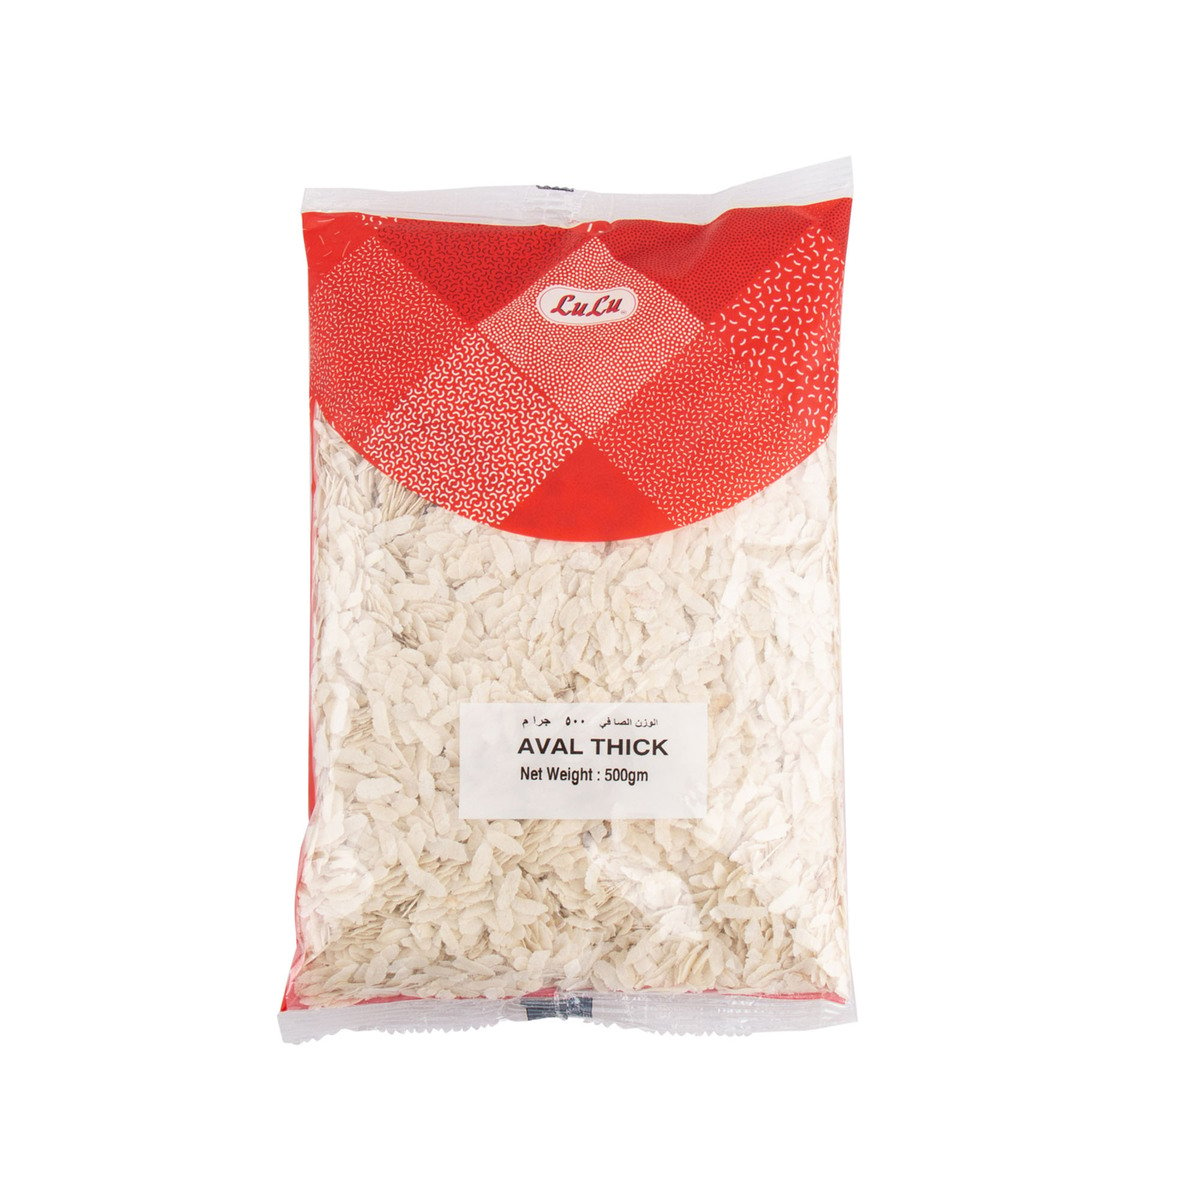 LuLu Aval Thick 500 g